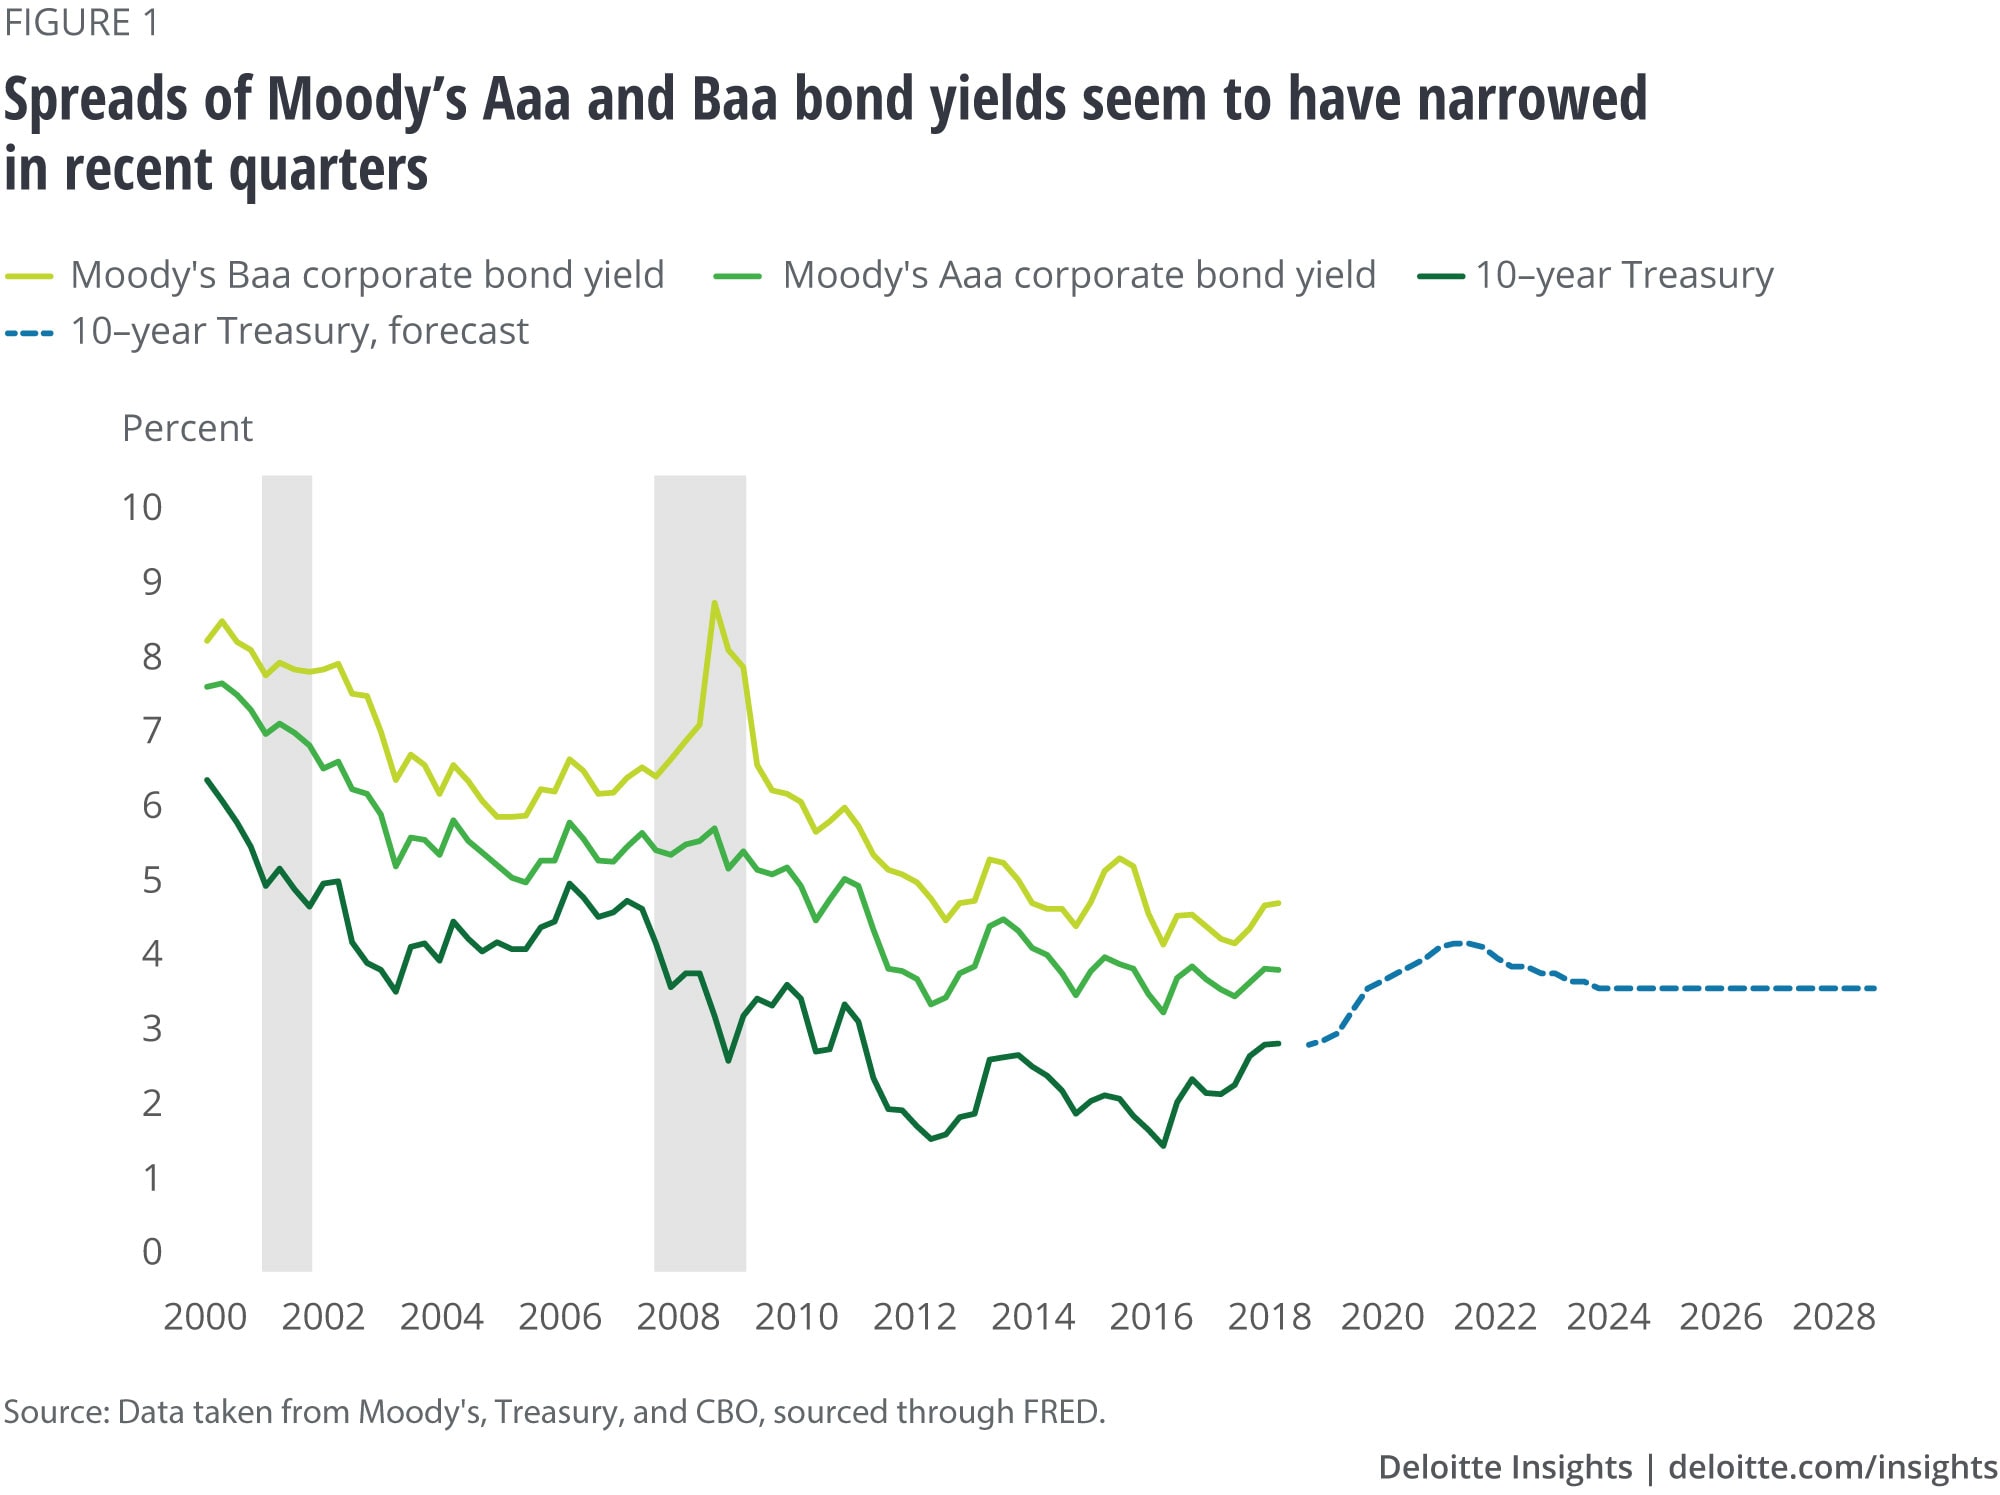 Spreads of Moody’s Aaa and Baa bond yields seem to have narrowed in recent quarters